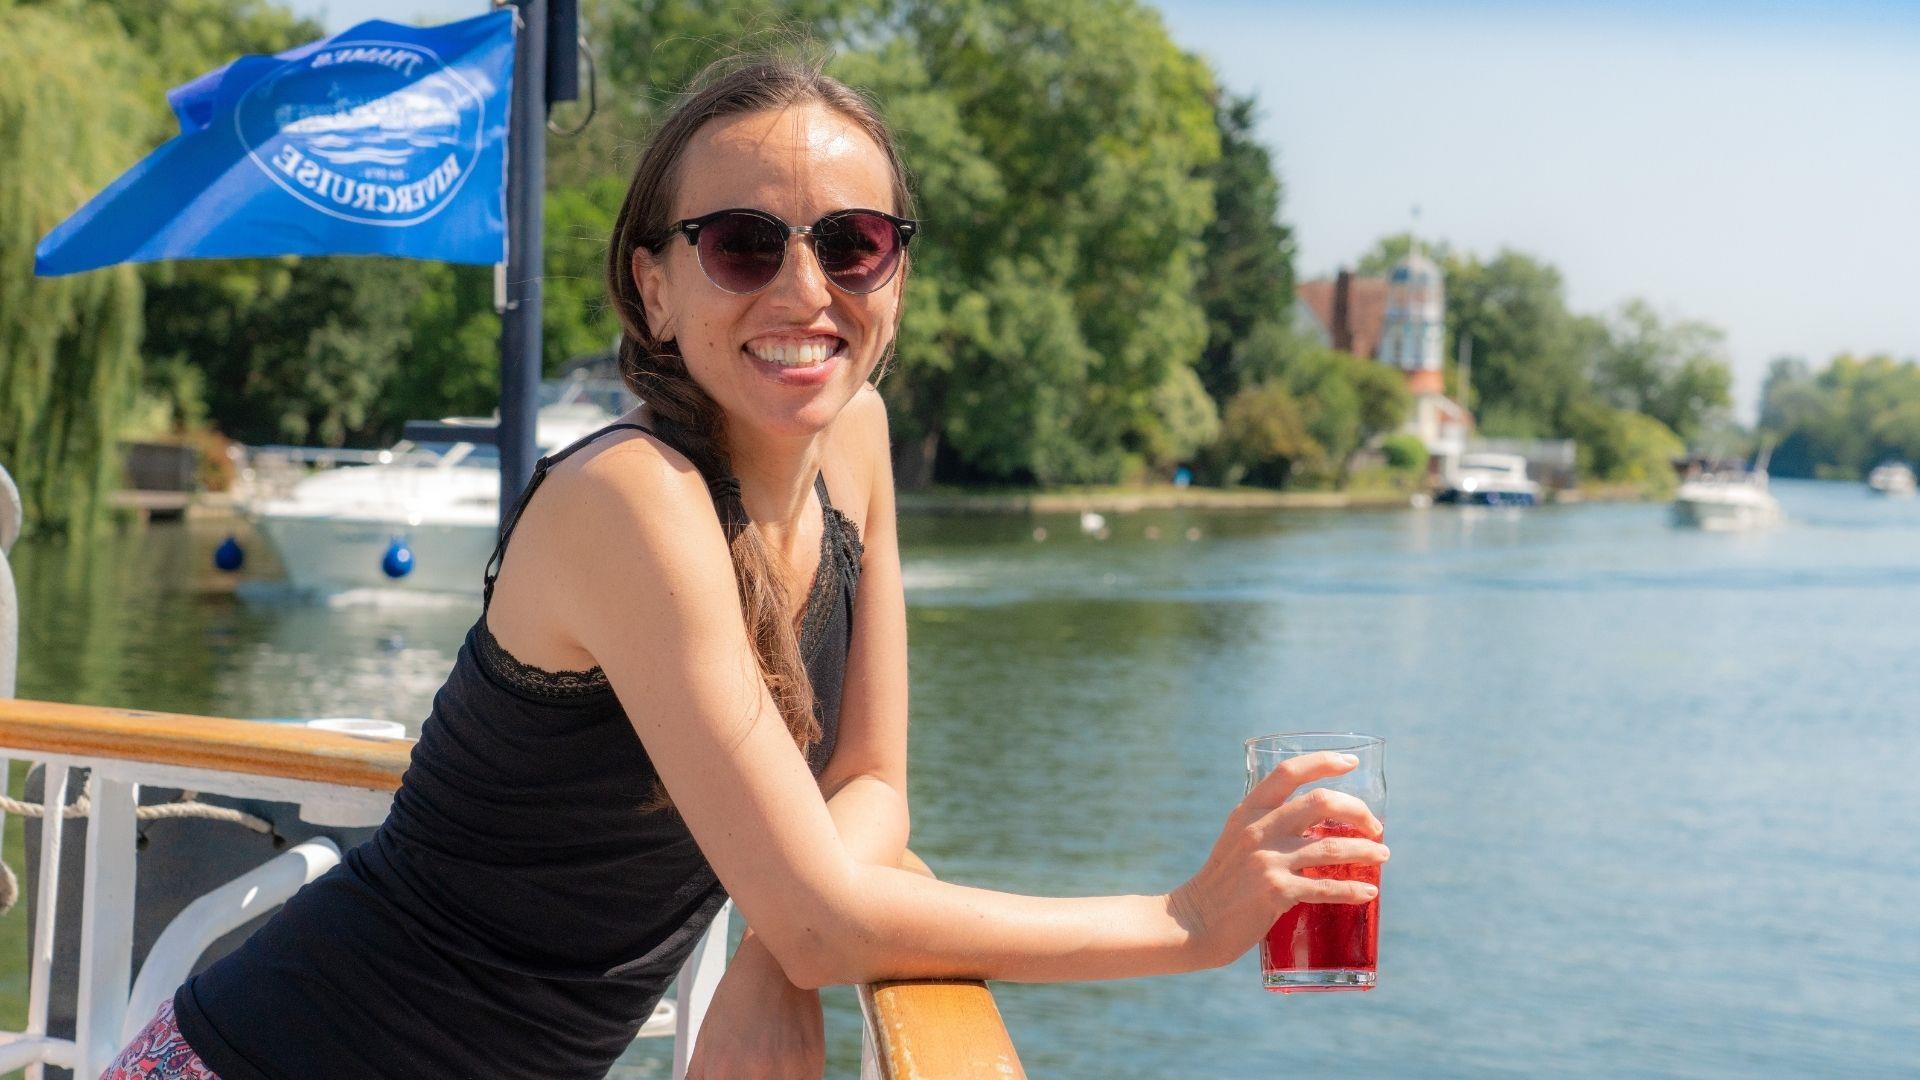 Lady drinking on board Thames River Cruise